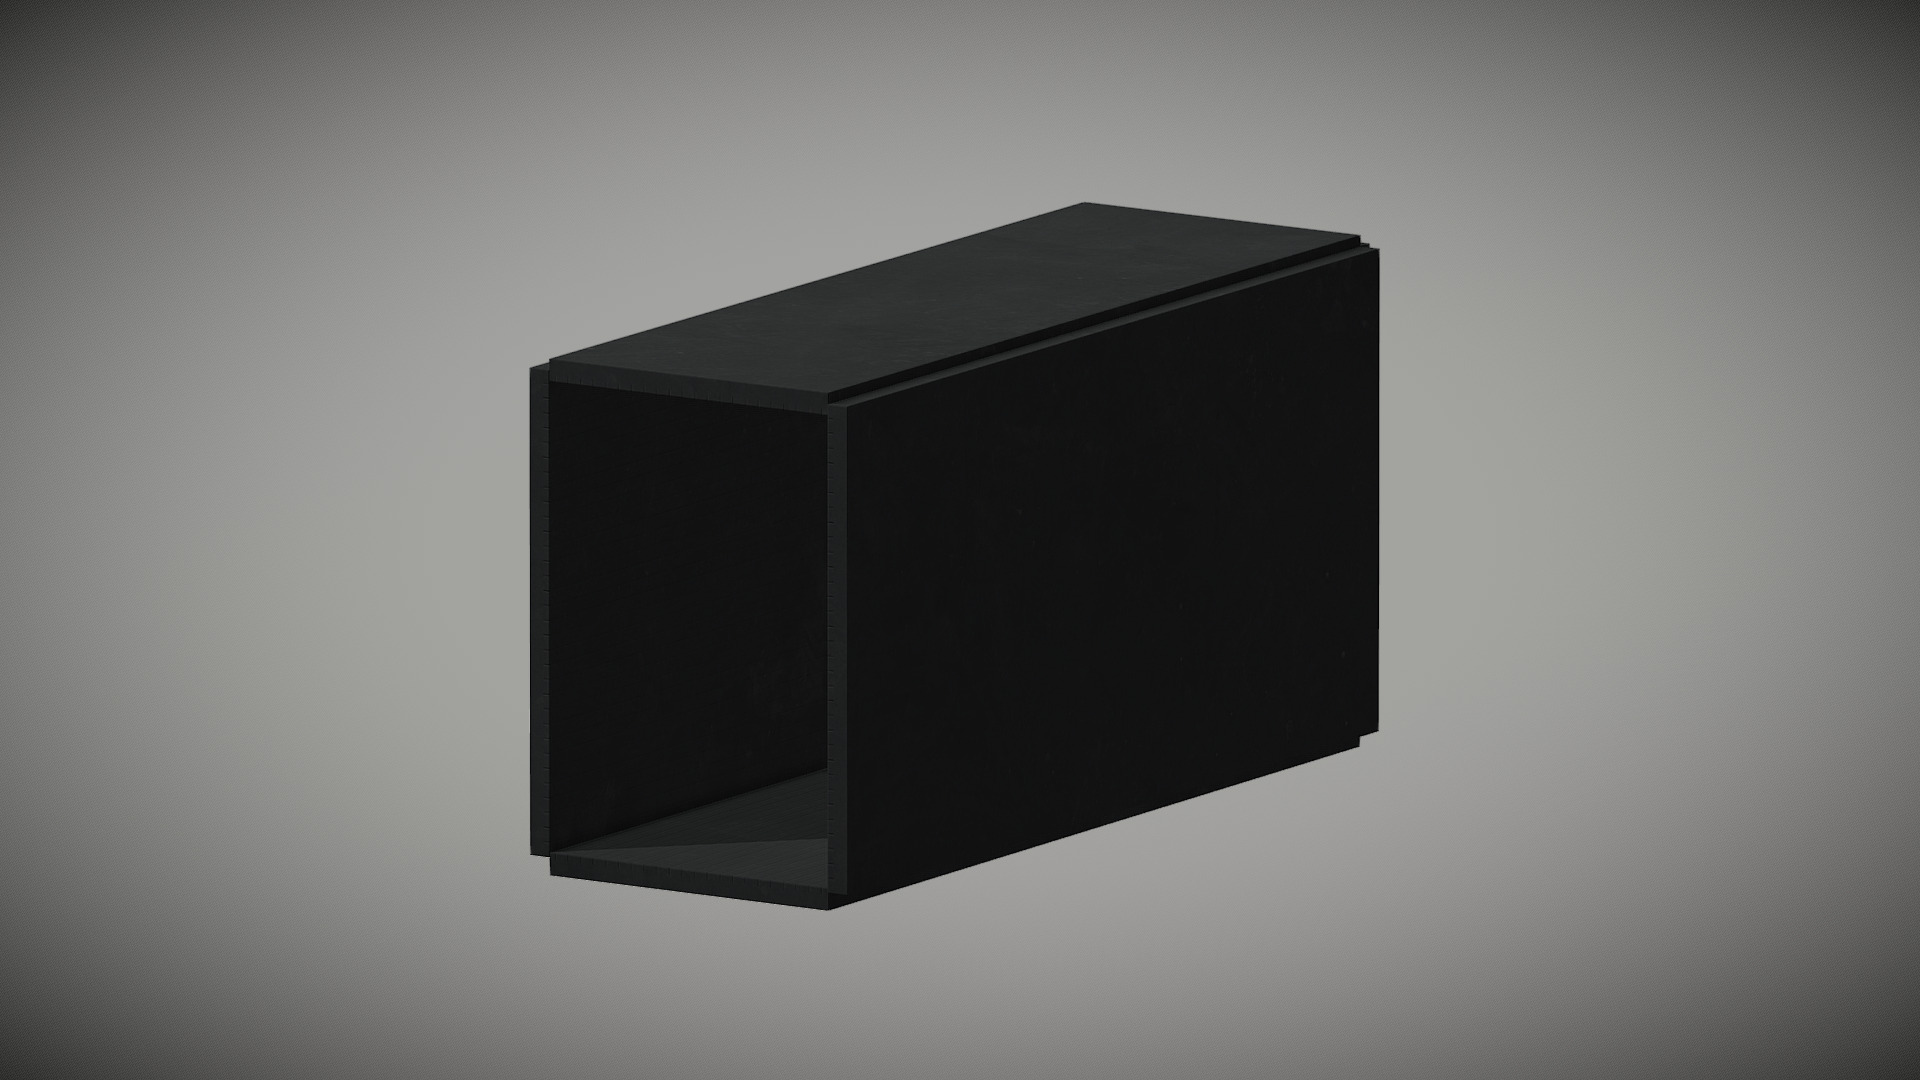 3D model Sci-Fi Lab Pack AAA: Rubber Holder - This is a 3D model of the Sci-Fi Lab Pack AAA: Rubber Holder. The 3D model is about a black rectangular object.